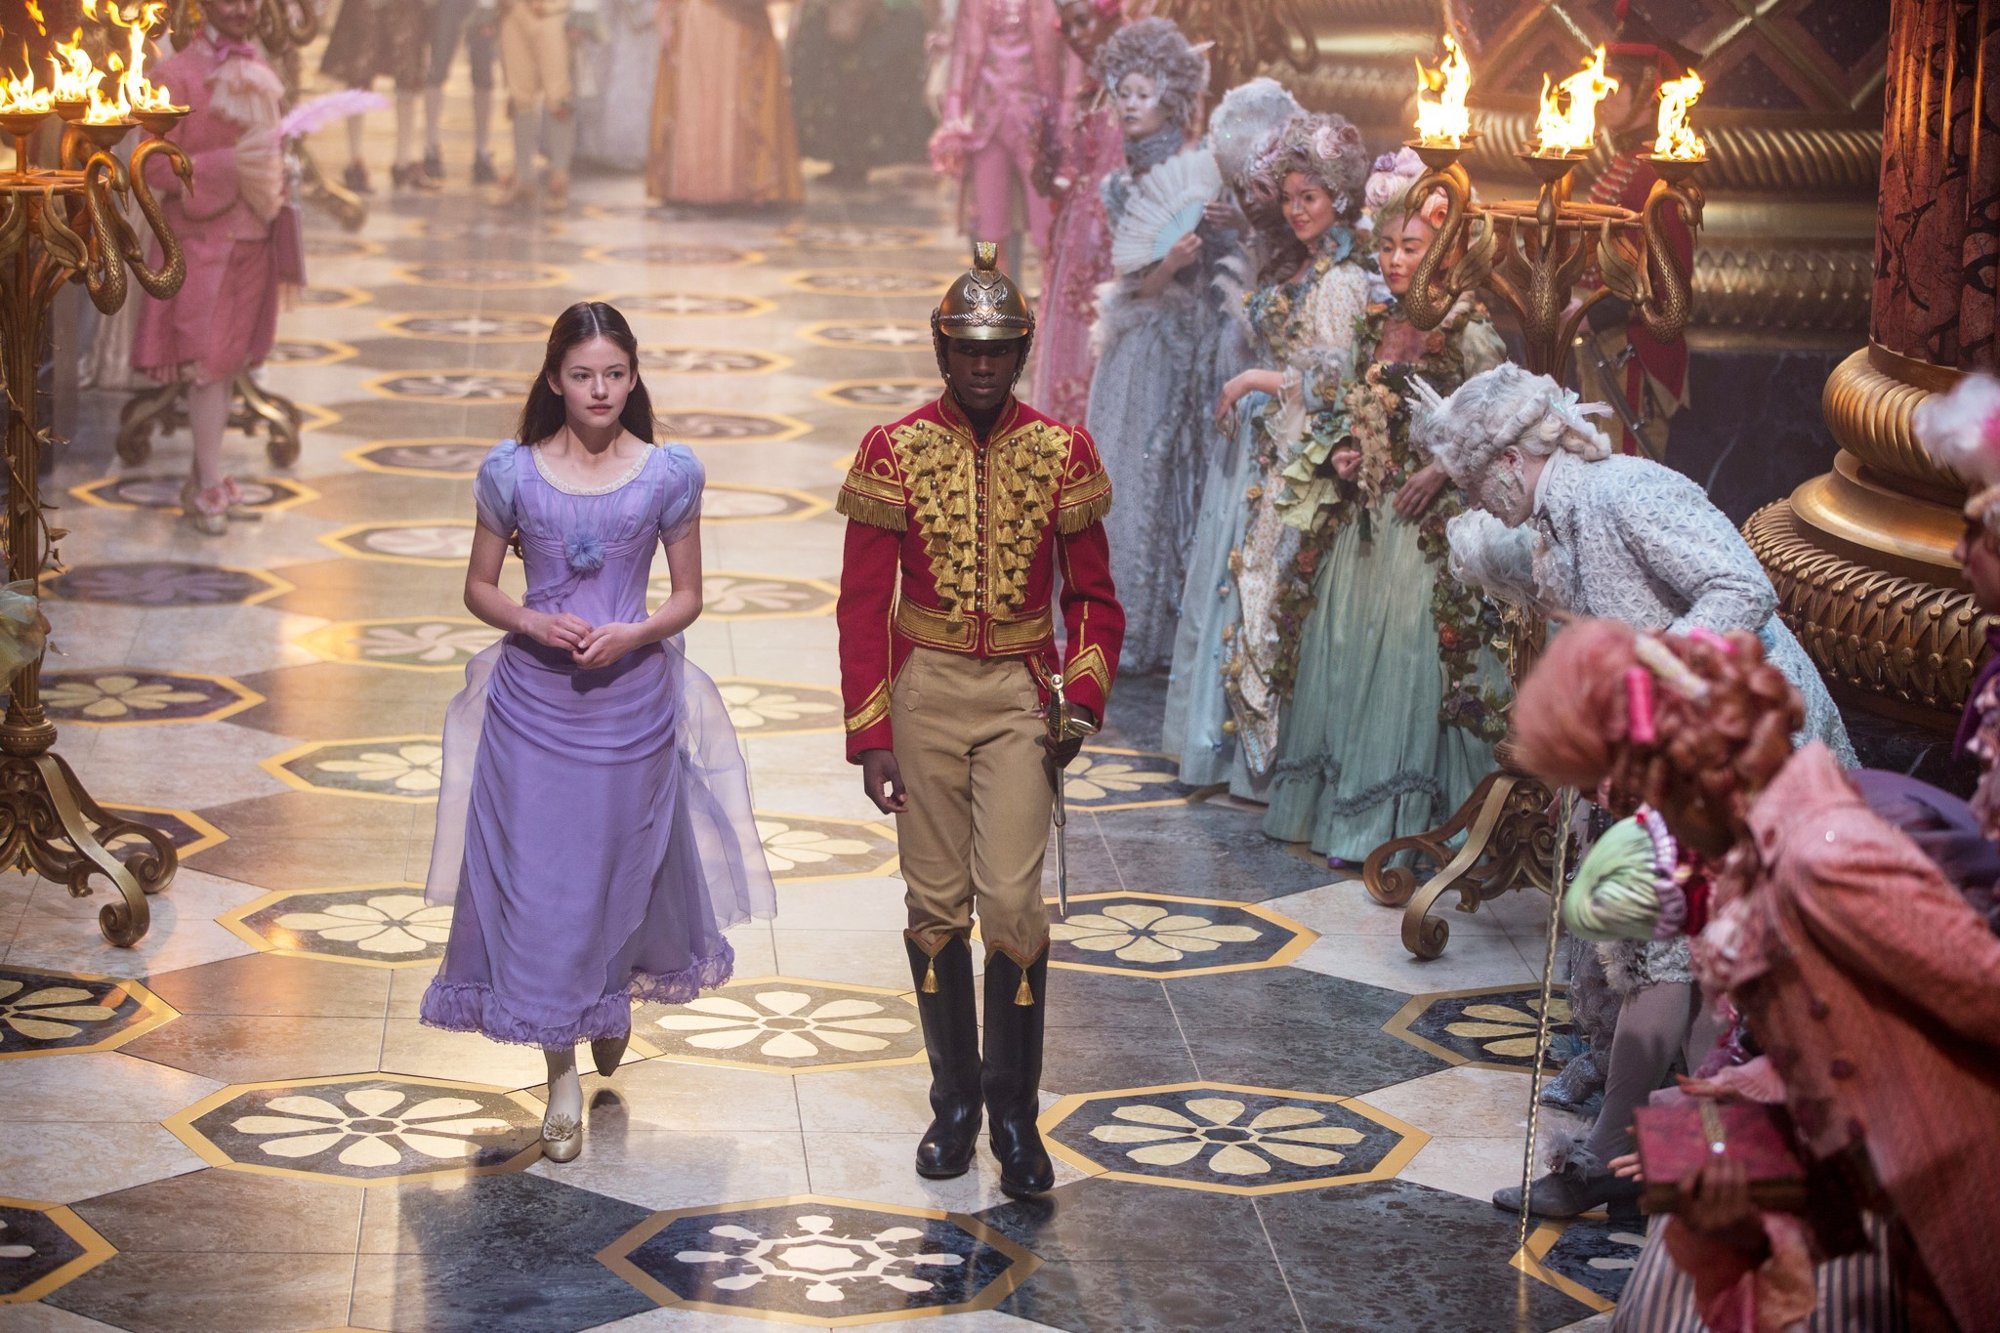 Mackenzie Foy stars as Clara and Jayden Fowora-Knight stars as Philip in Walt Disney Pictures' The Nutcracker and the Four Realms (2018)